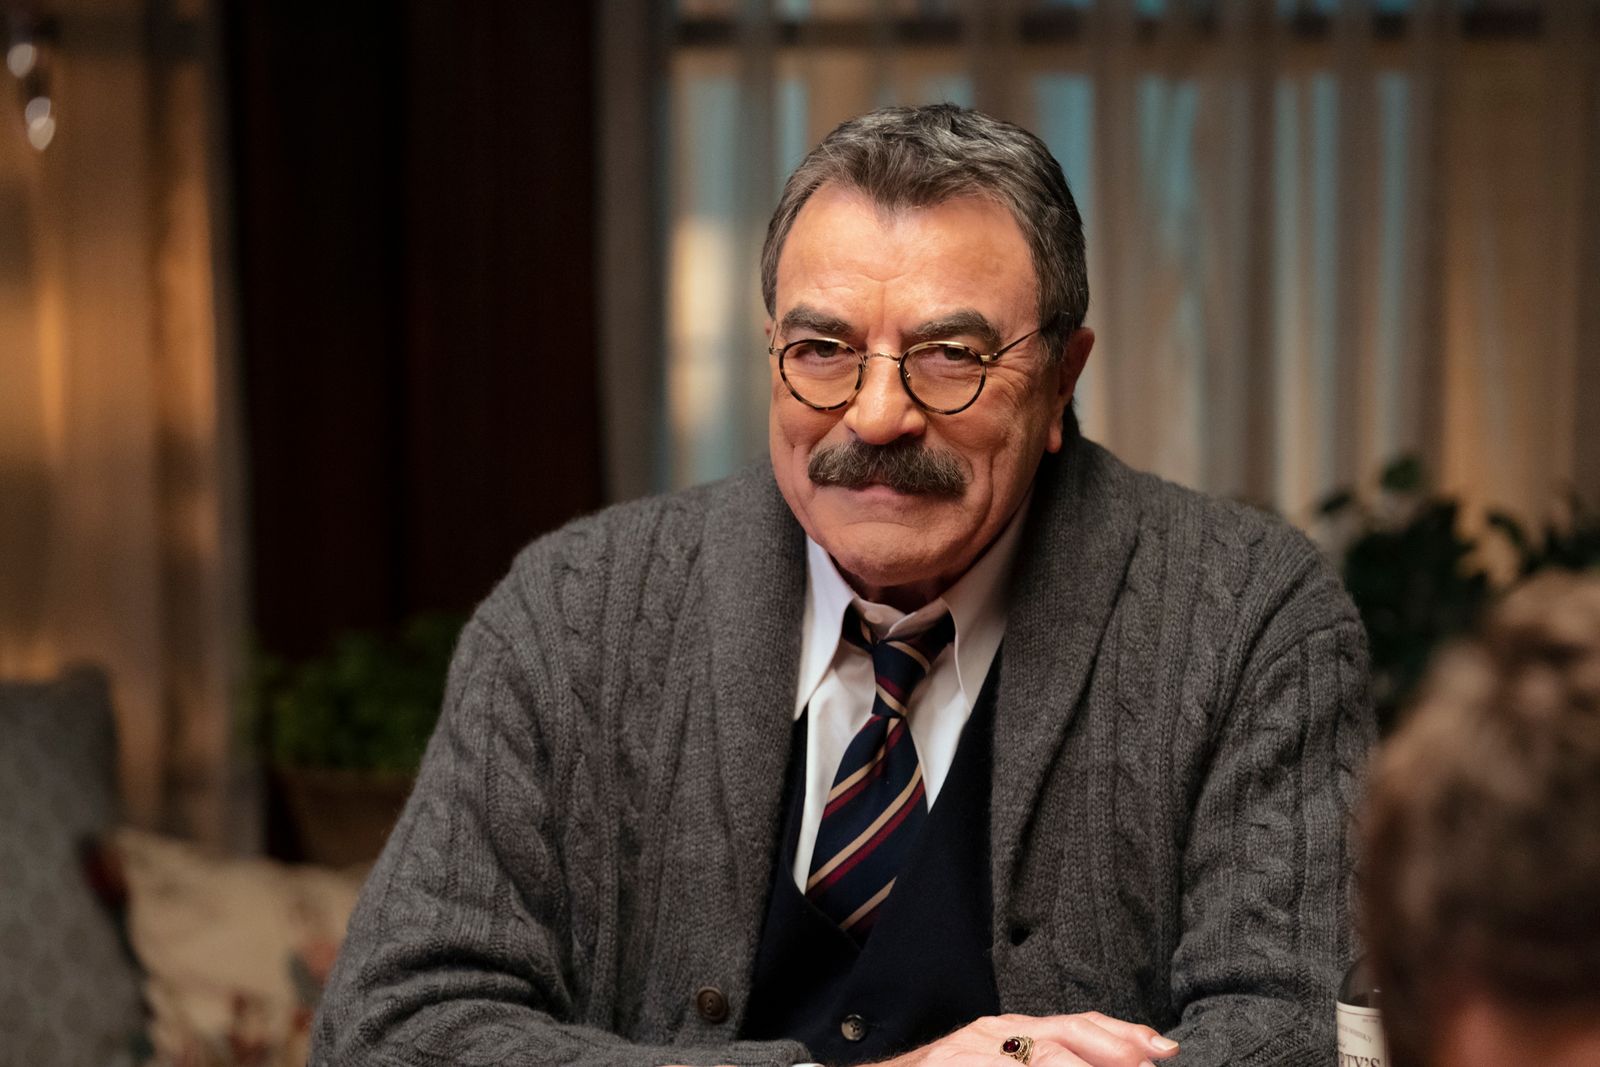 Tom Selleck as Frank Reagan on "Blue Bloods" | Getty Images 